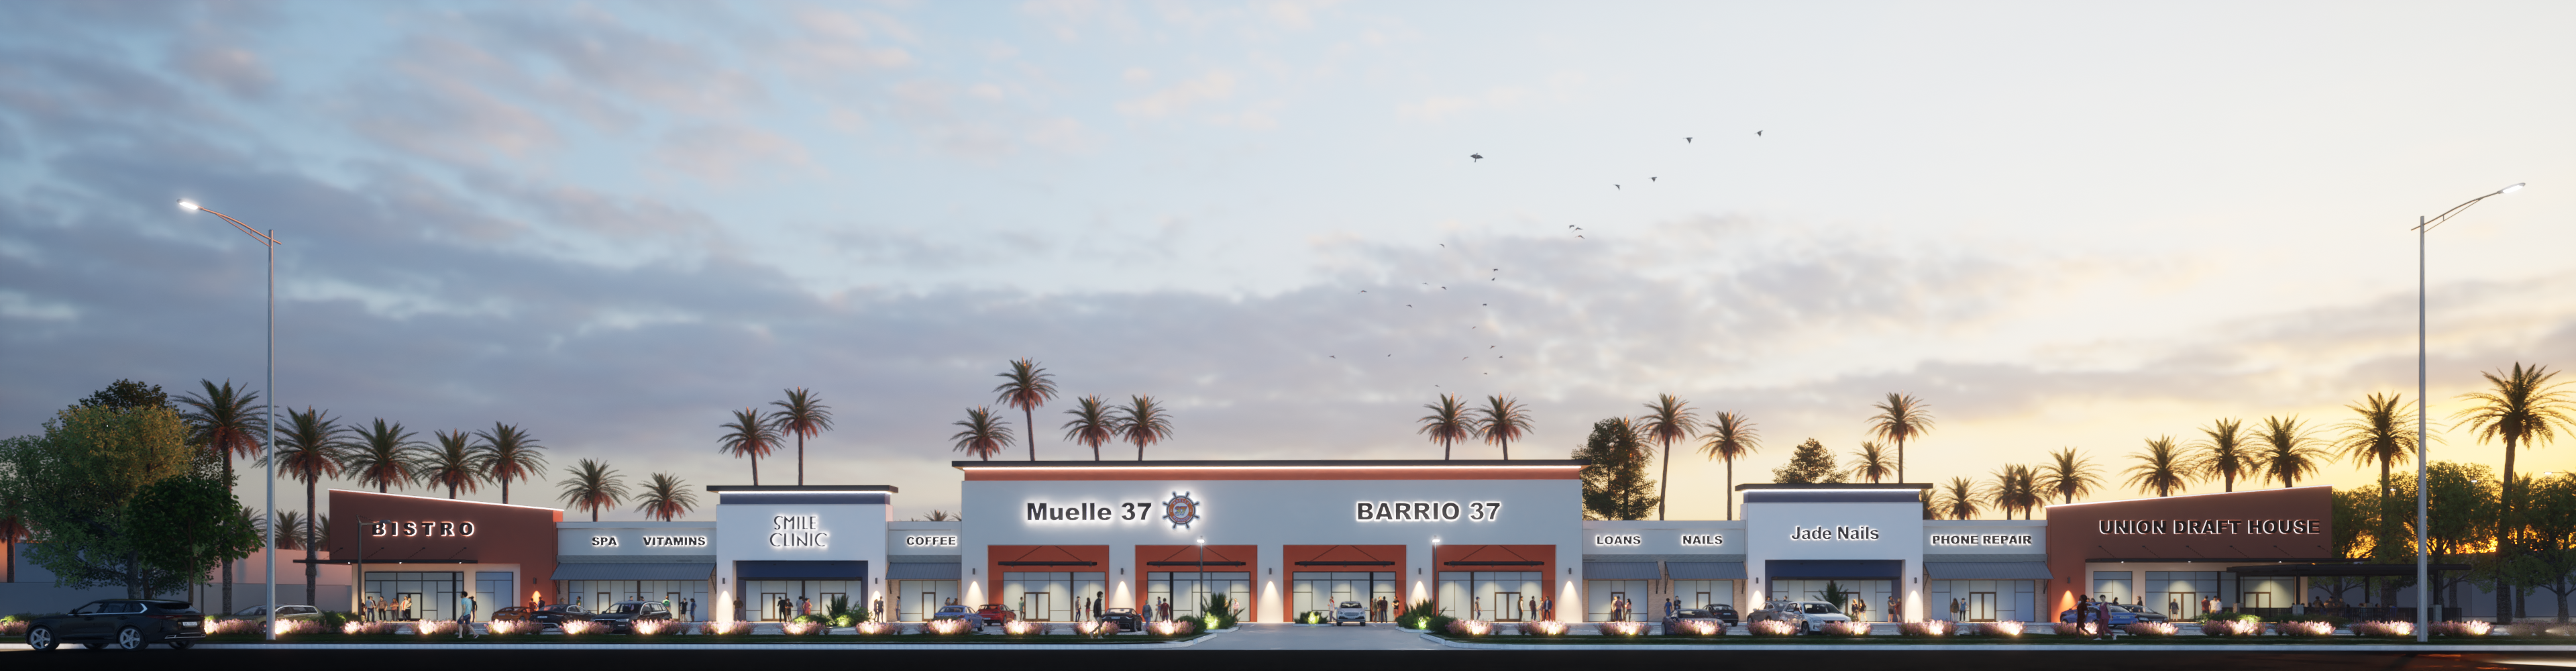 A rendering of a shopping center at dusk.